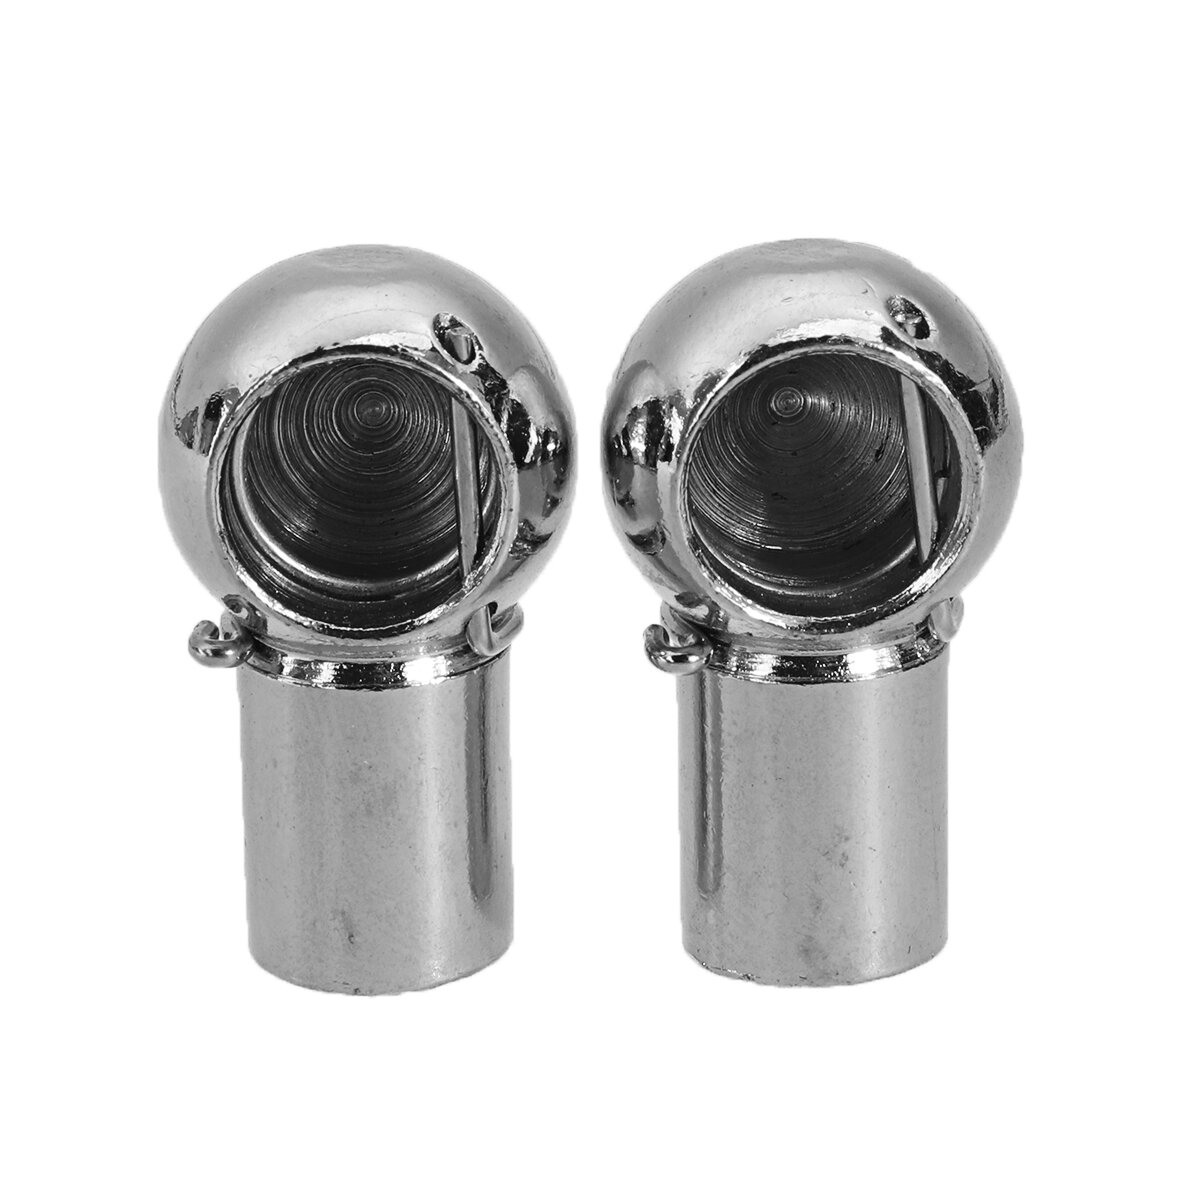 2PCS M6/M8 Thread Female Ball Stud Socket Support Rod Accessories For Gas Spring Strut Ends Fittings